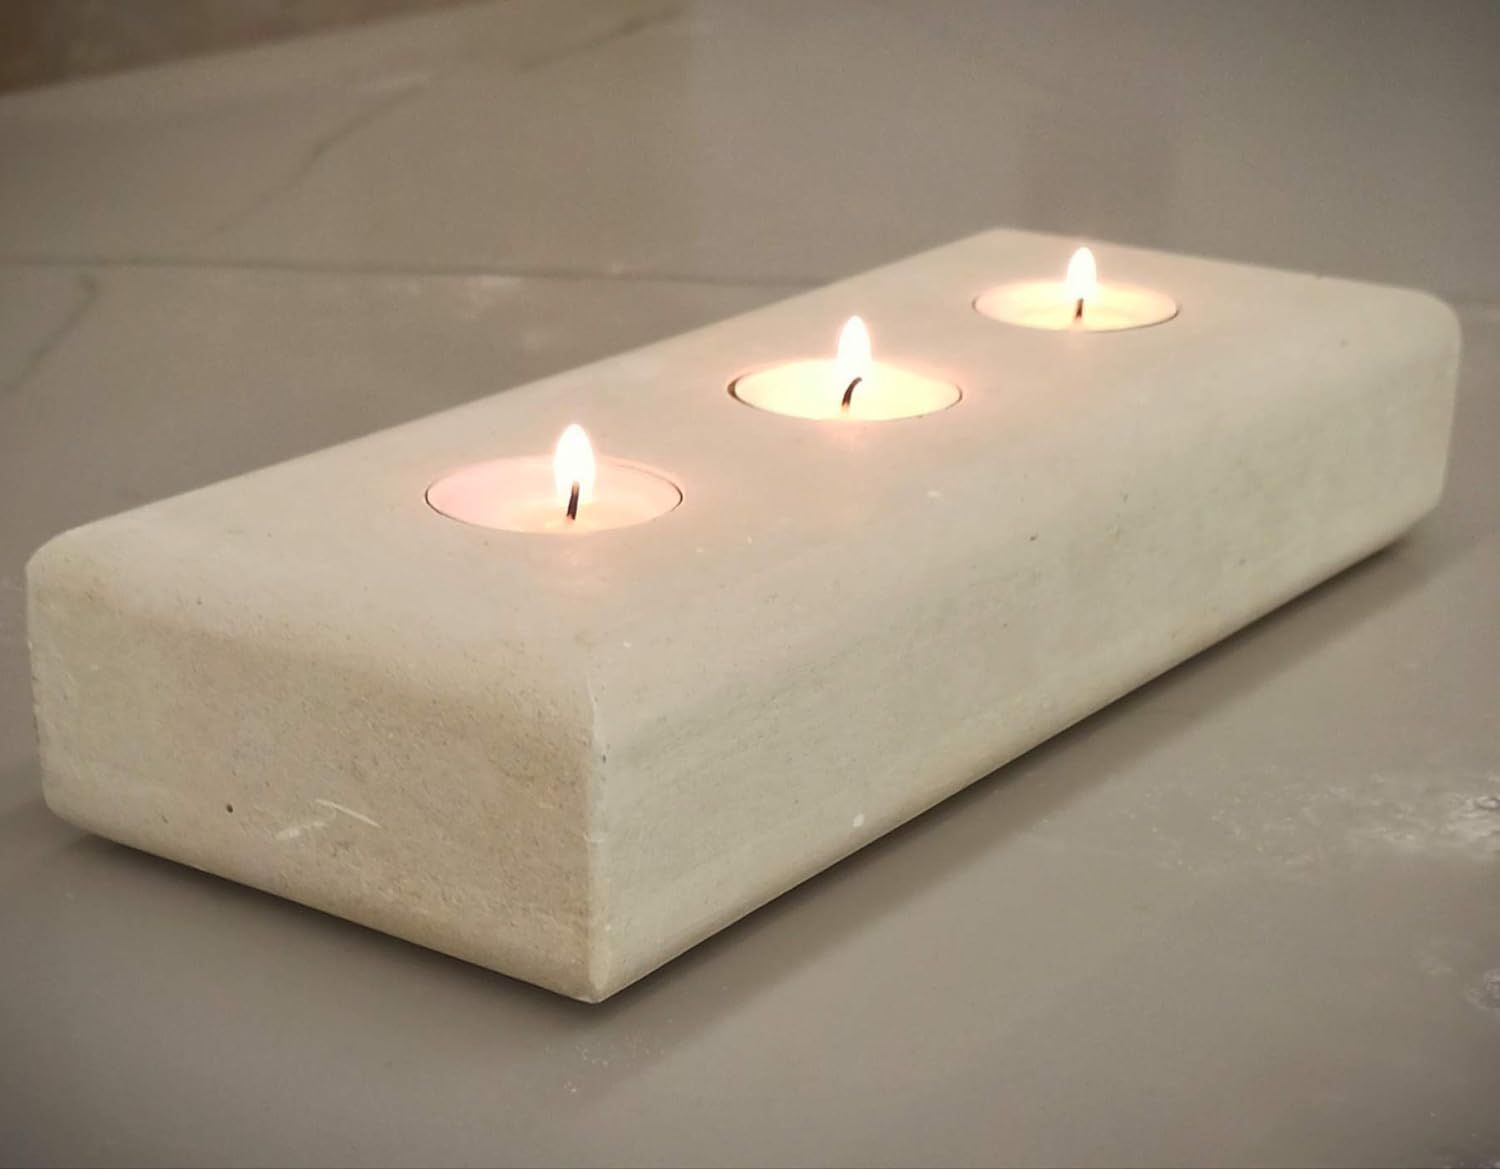 Handmade Stone Centerpiece Tealight Candle Holder - 1 Side Smooth, 1 Side with Grooves - Incl Gif... | Amazon (US)